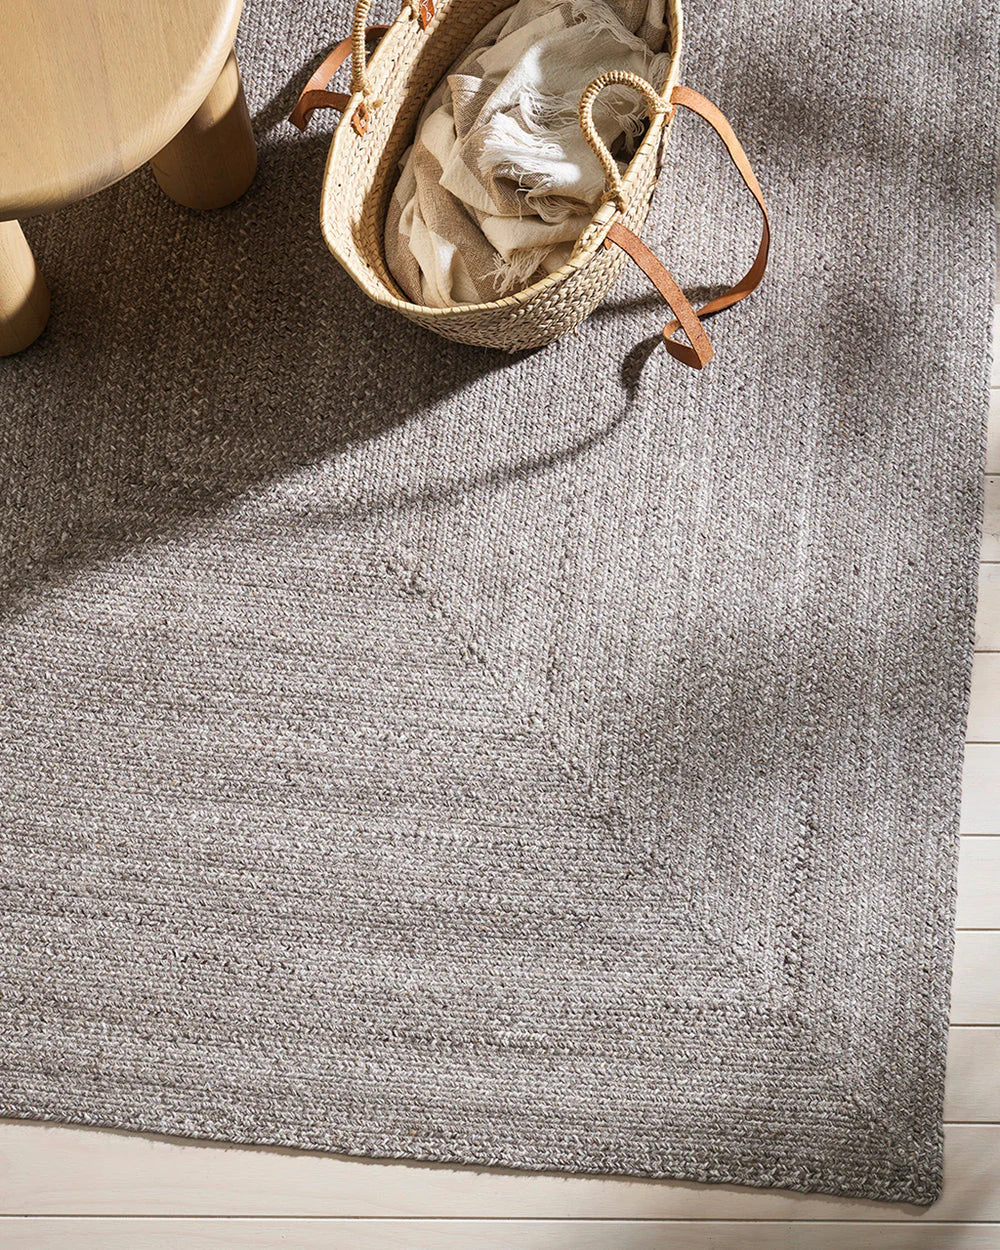 Flinders Taupe PET Outdoor Rug from Baya Furtex Stockist Make Your House A Home, Furniture Store Bendigo. Free Australia Wide Delivery.